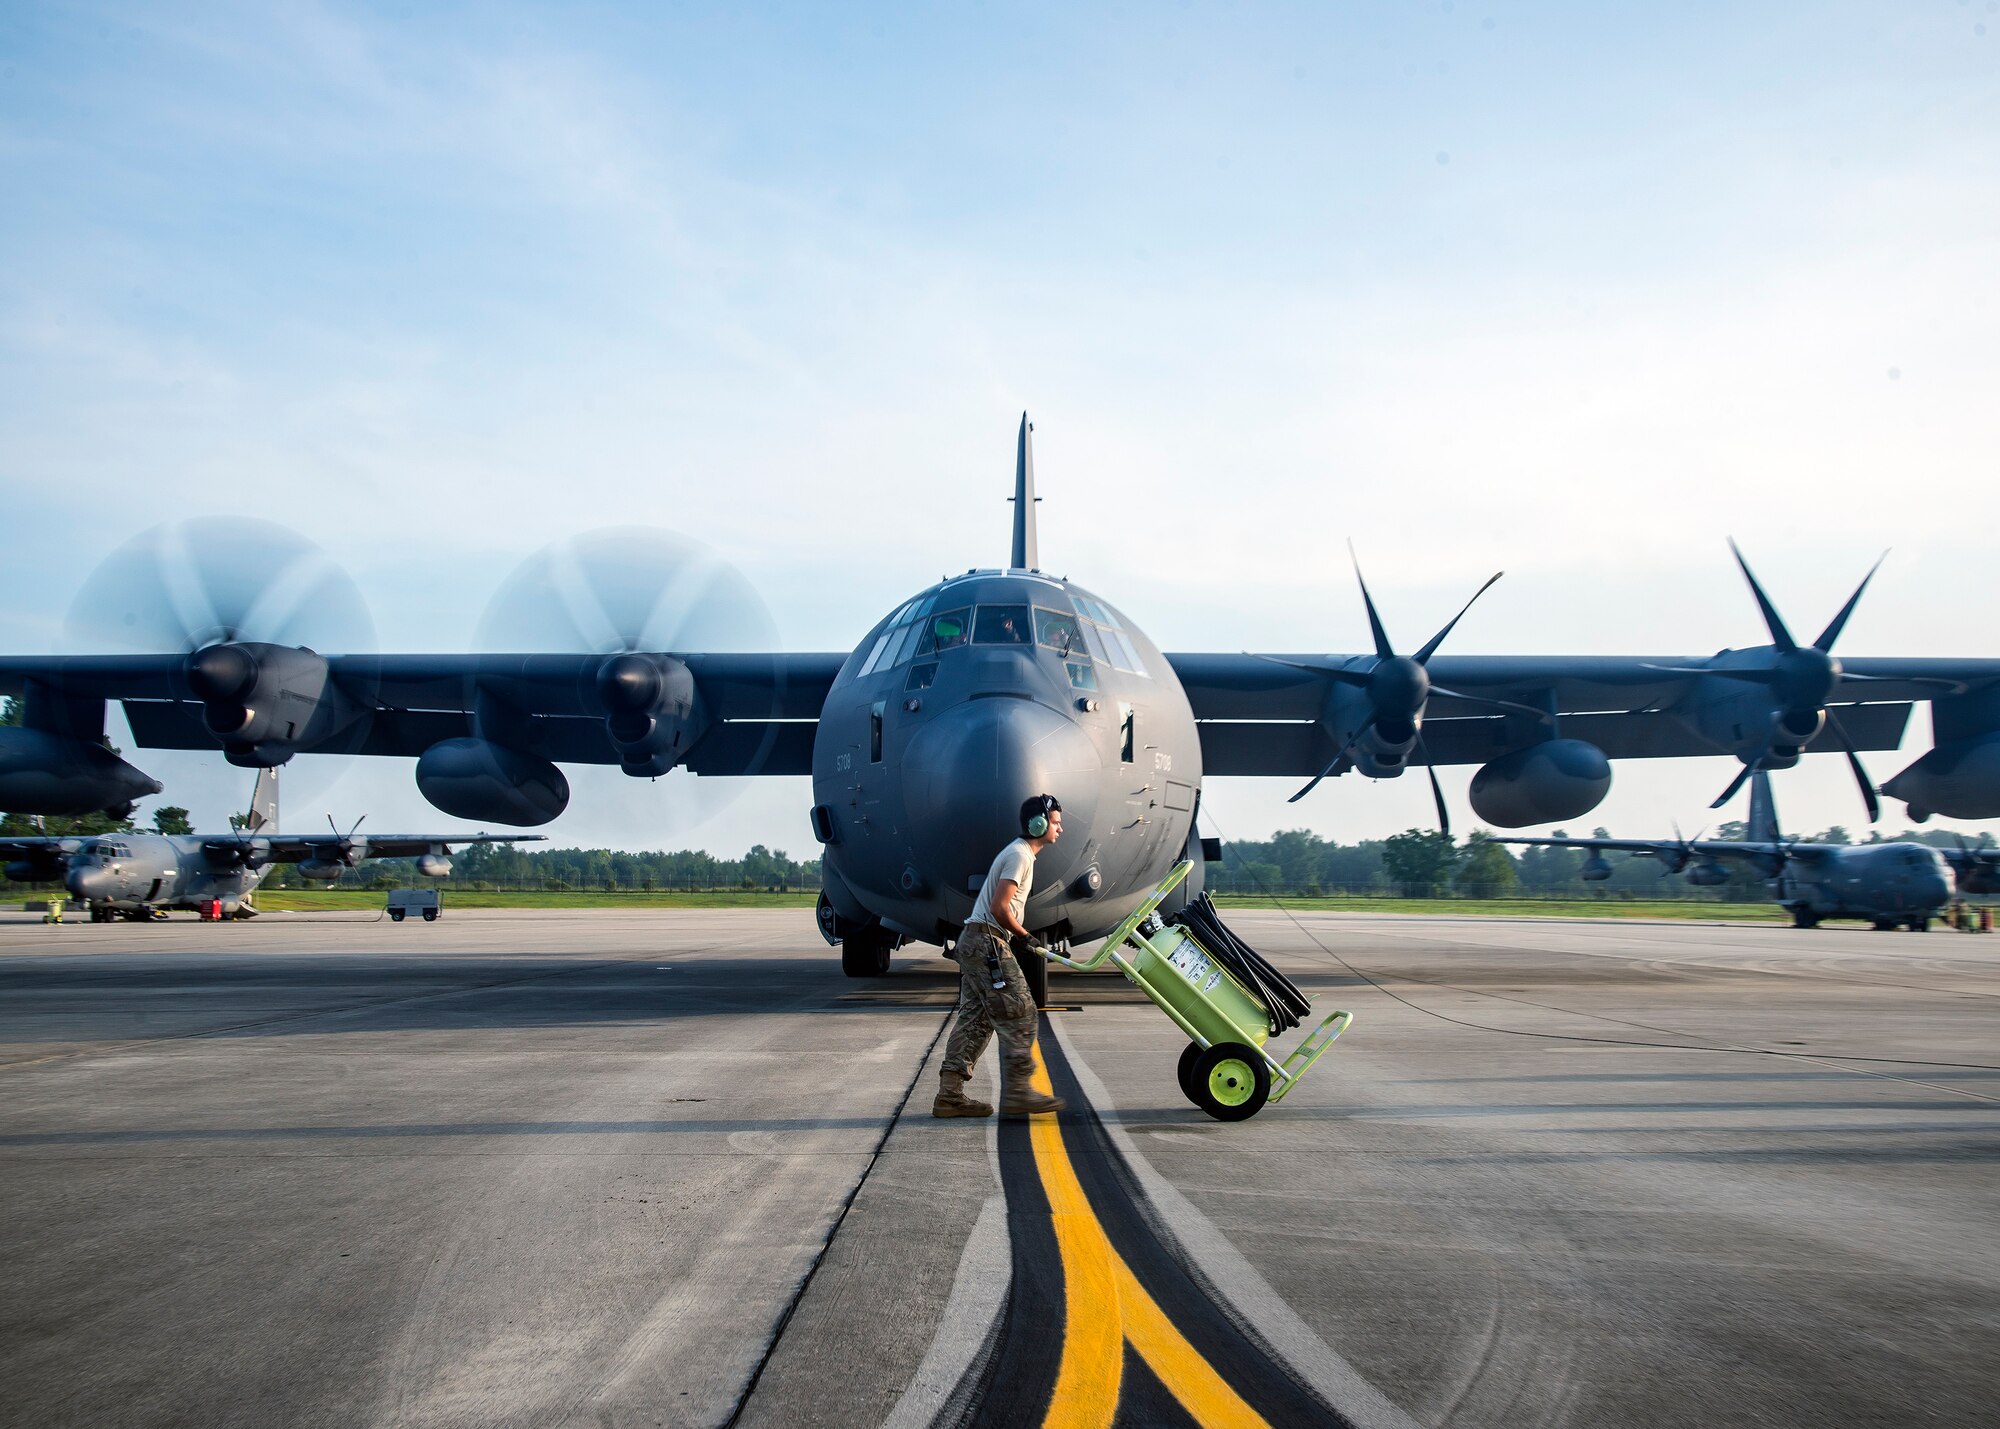 An Airman from the 71st Aircraft Maintenance Unit (AMU) pushes a fire bottle across the flight line, Aug. 13, 2019, at Moody Air Force Base, Ga. Airmen from the 71st AMU perform various tasks prior to take off to ensure the aircraft is performing optimally to complete its mission of supporting the 71st Rescue Squadron. Those tasks consist of: pre-flight inspection, removing plugs and cover, repairing any problems found during crew pre-flight checks as well as marshaling the aircraft for takeoff. (U.S. Air Force photo by Airman 1st Class Eugene Oliver)